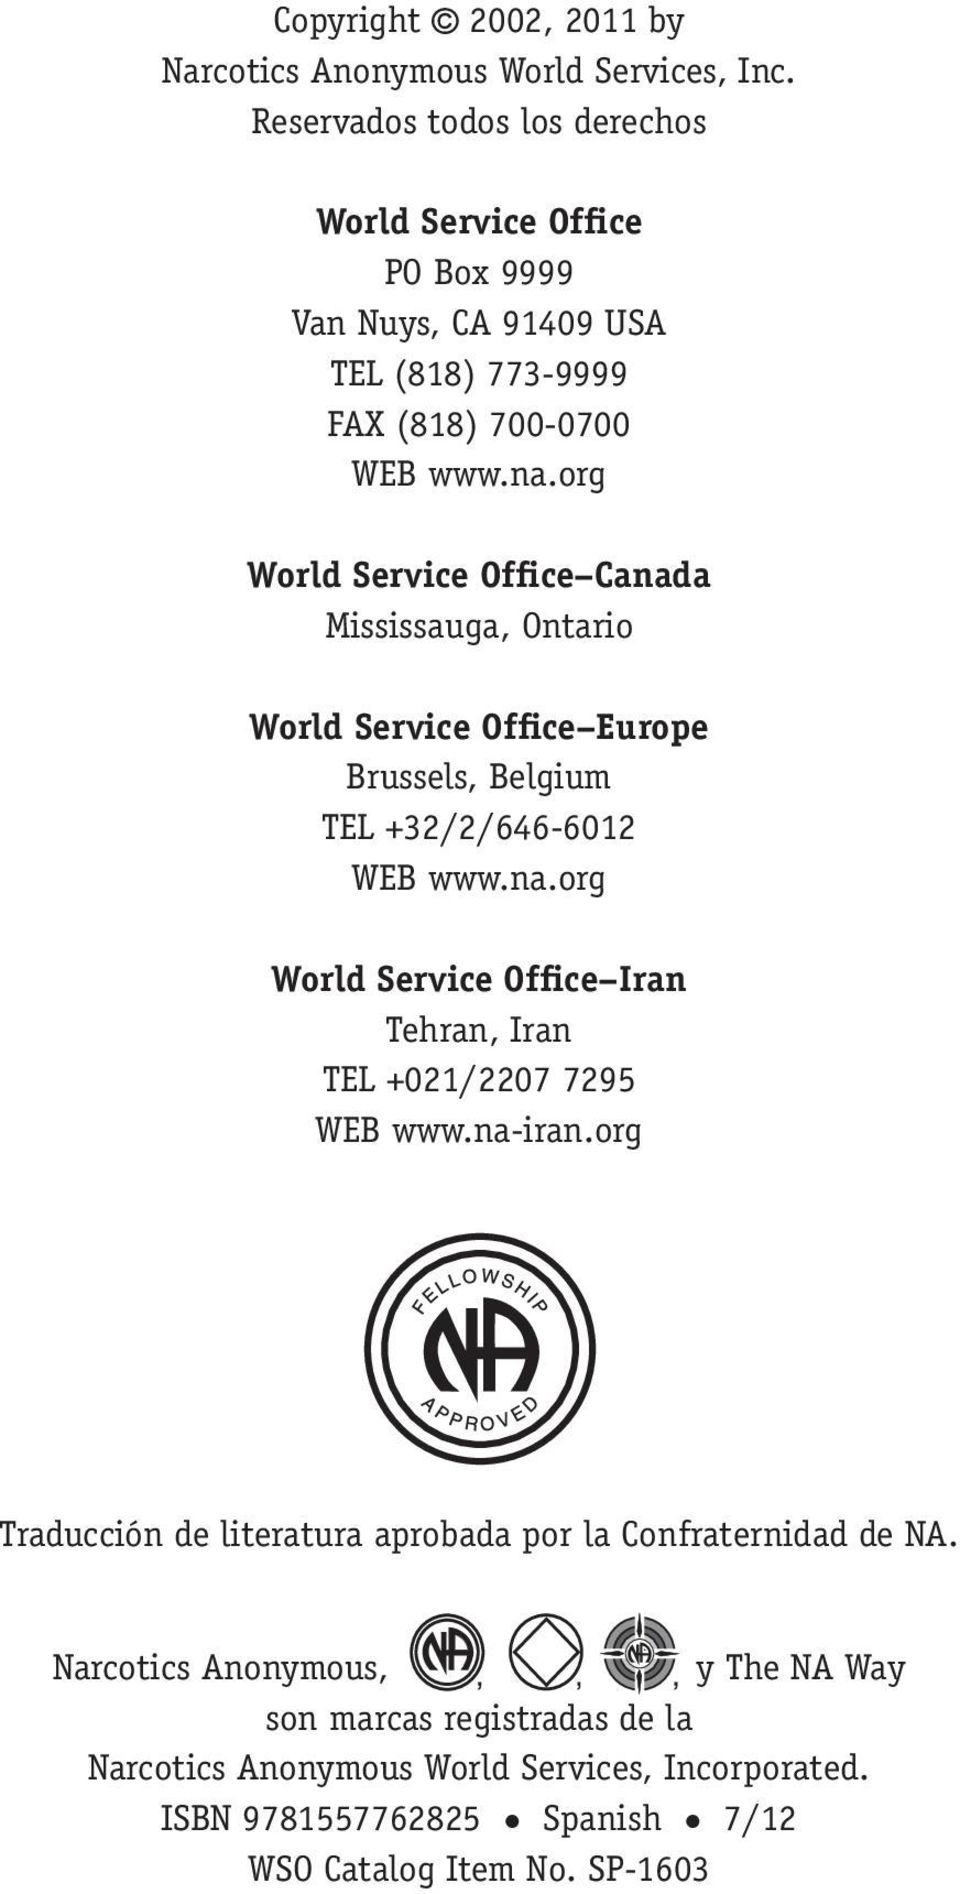 org World Service Office Canada Mississauga, Ontario World Service Office Europe Brussels, Belgium TEL +32/2/646-6012 WEB www.na.org World Service Office Iran Tehran, Iran TEL +021/2207 7295 WEB www.